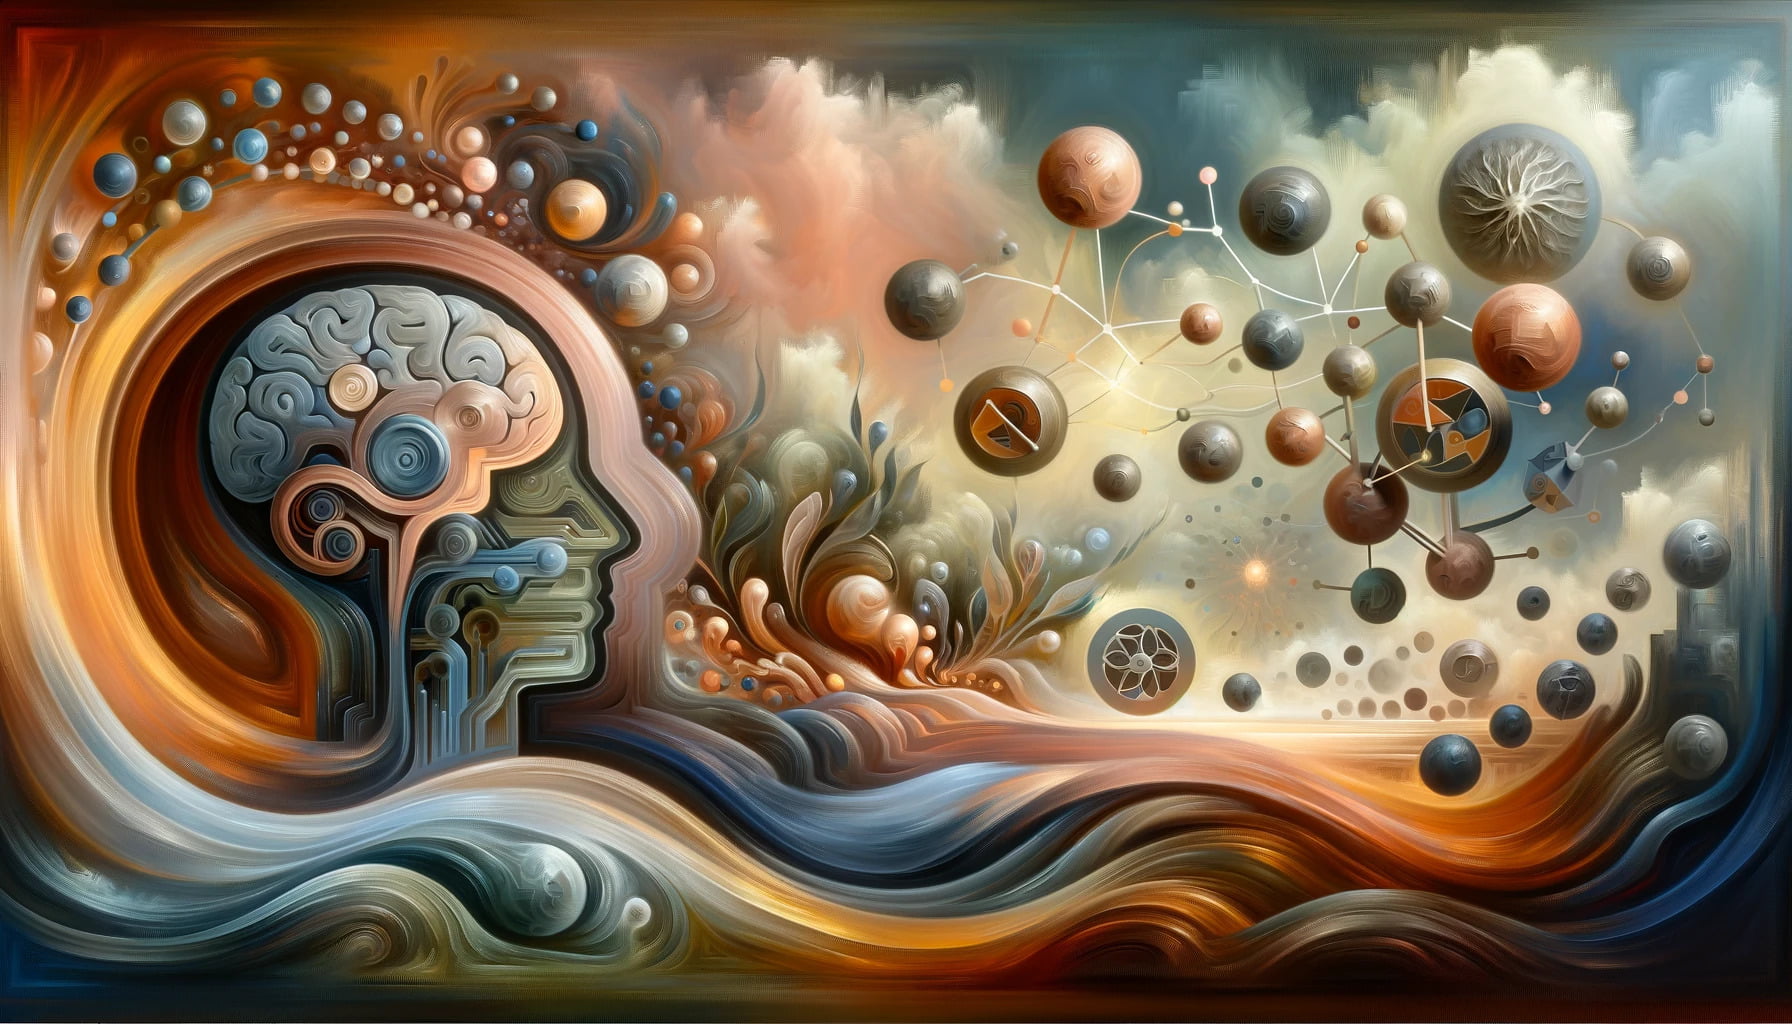 a surreal and imaginative image of the neurological effects of copper as a nootropic